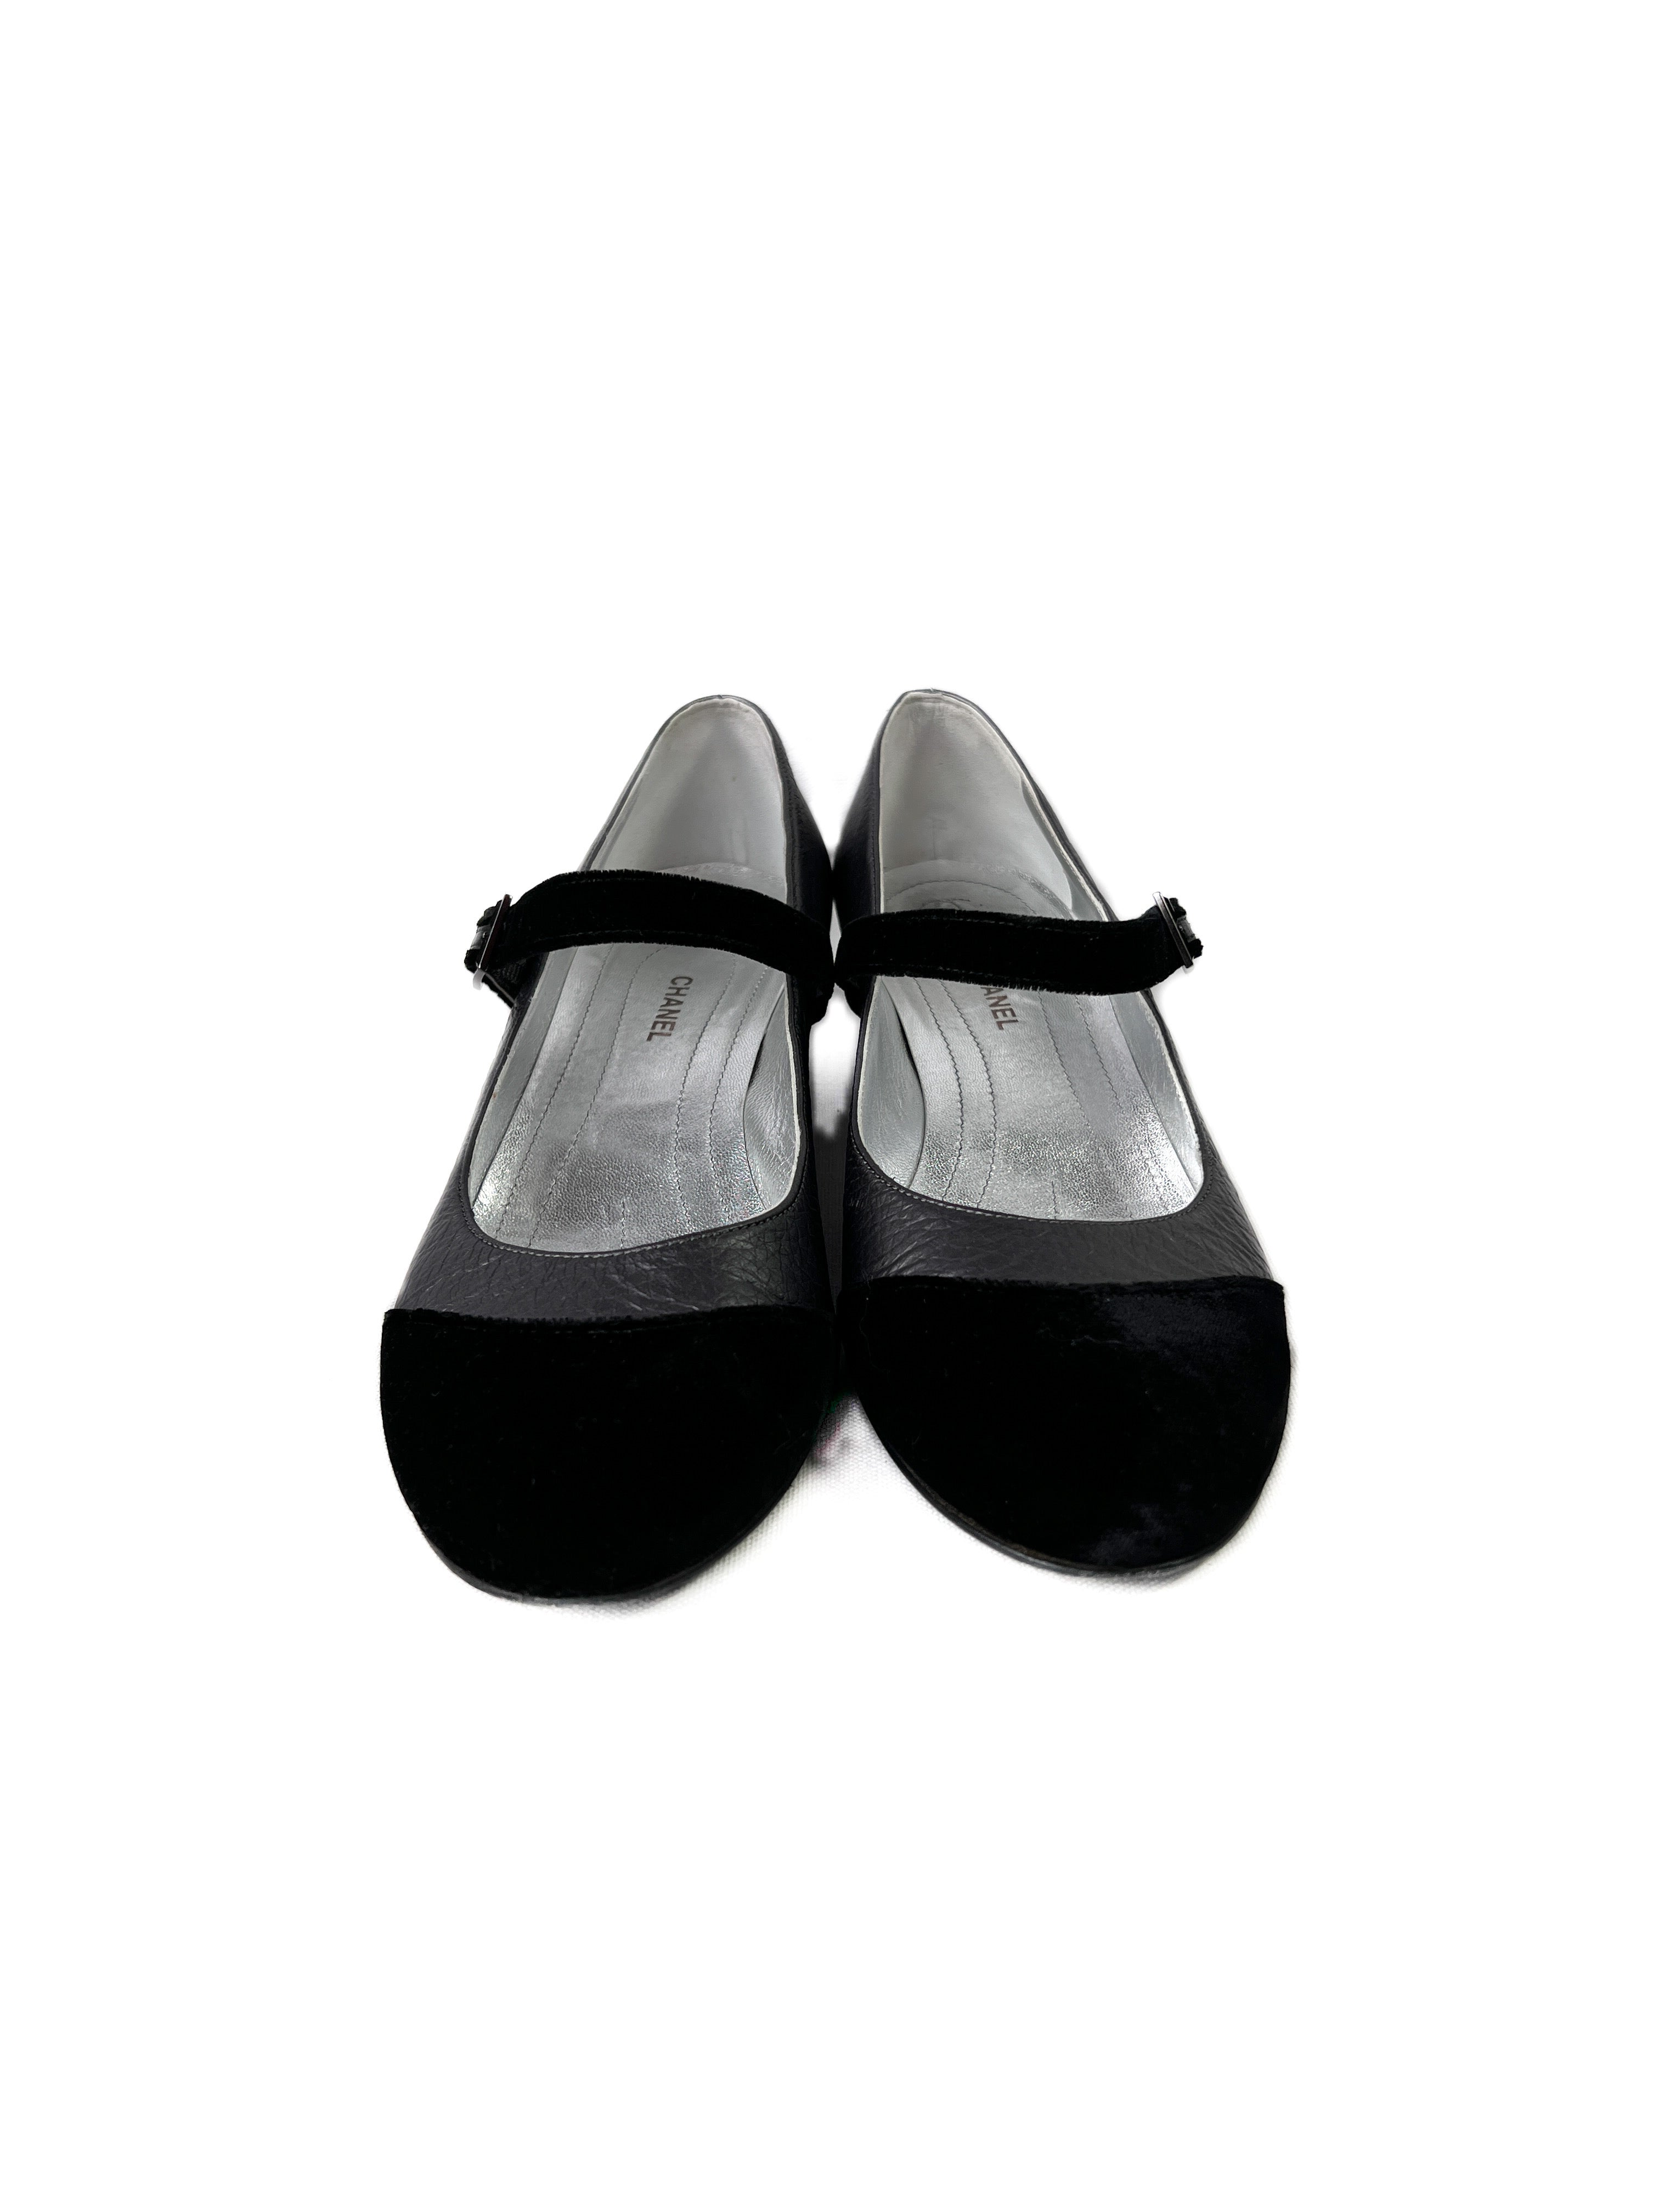 chanel mary janes black 8